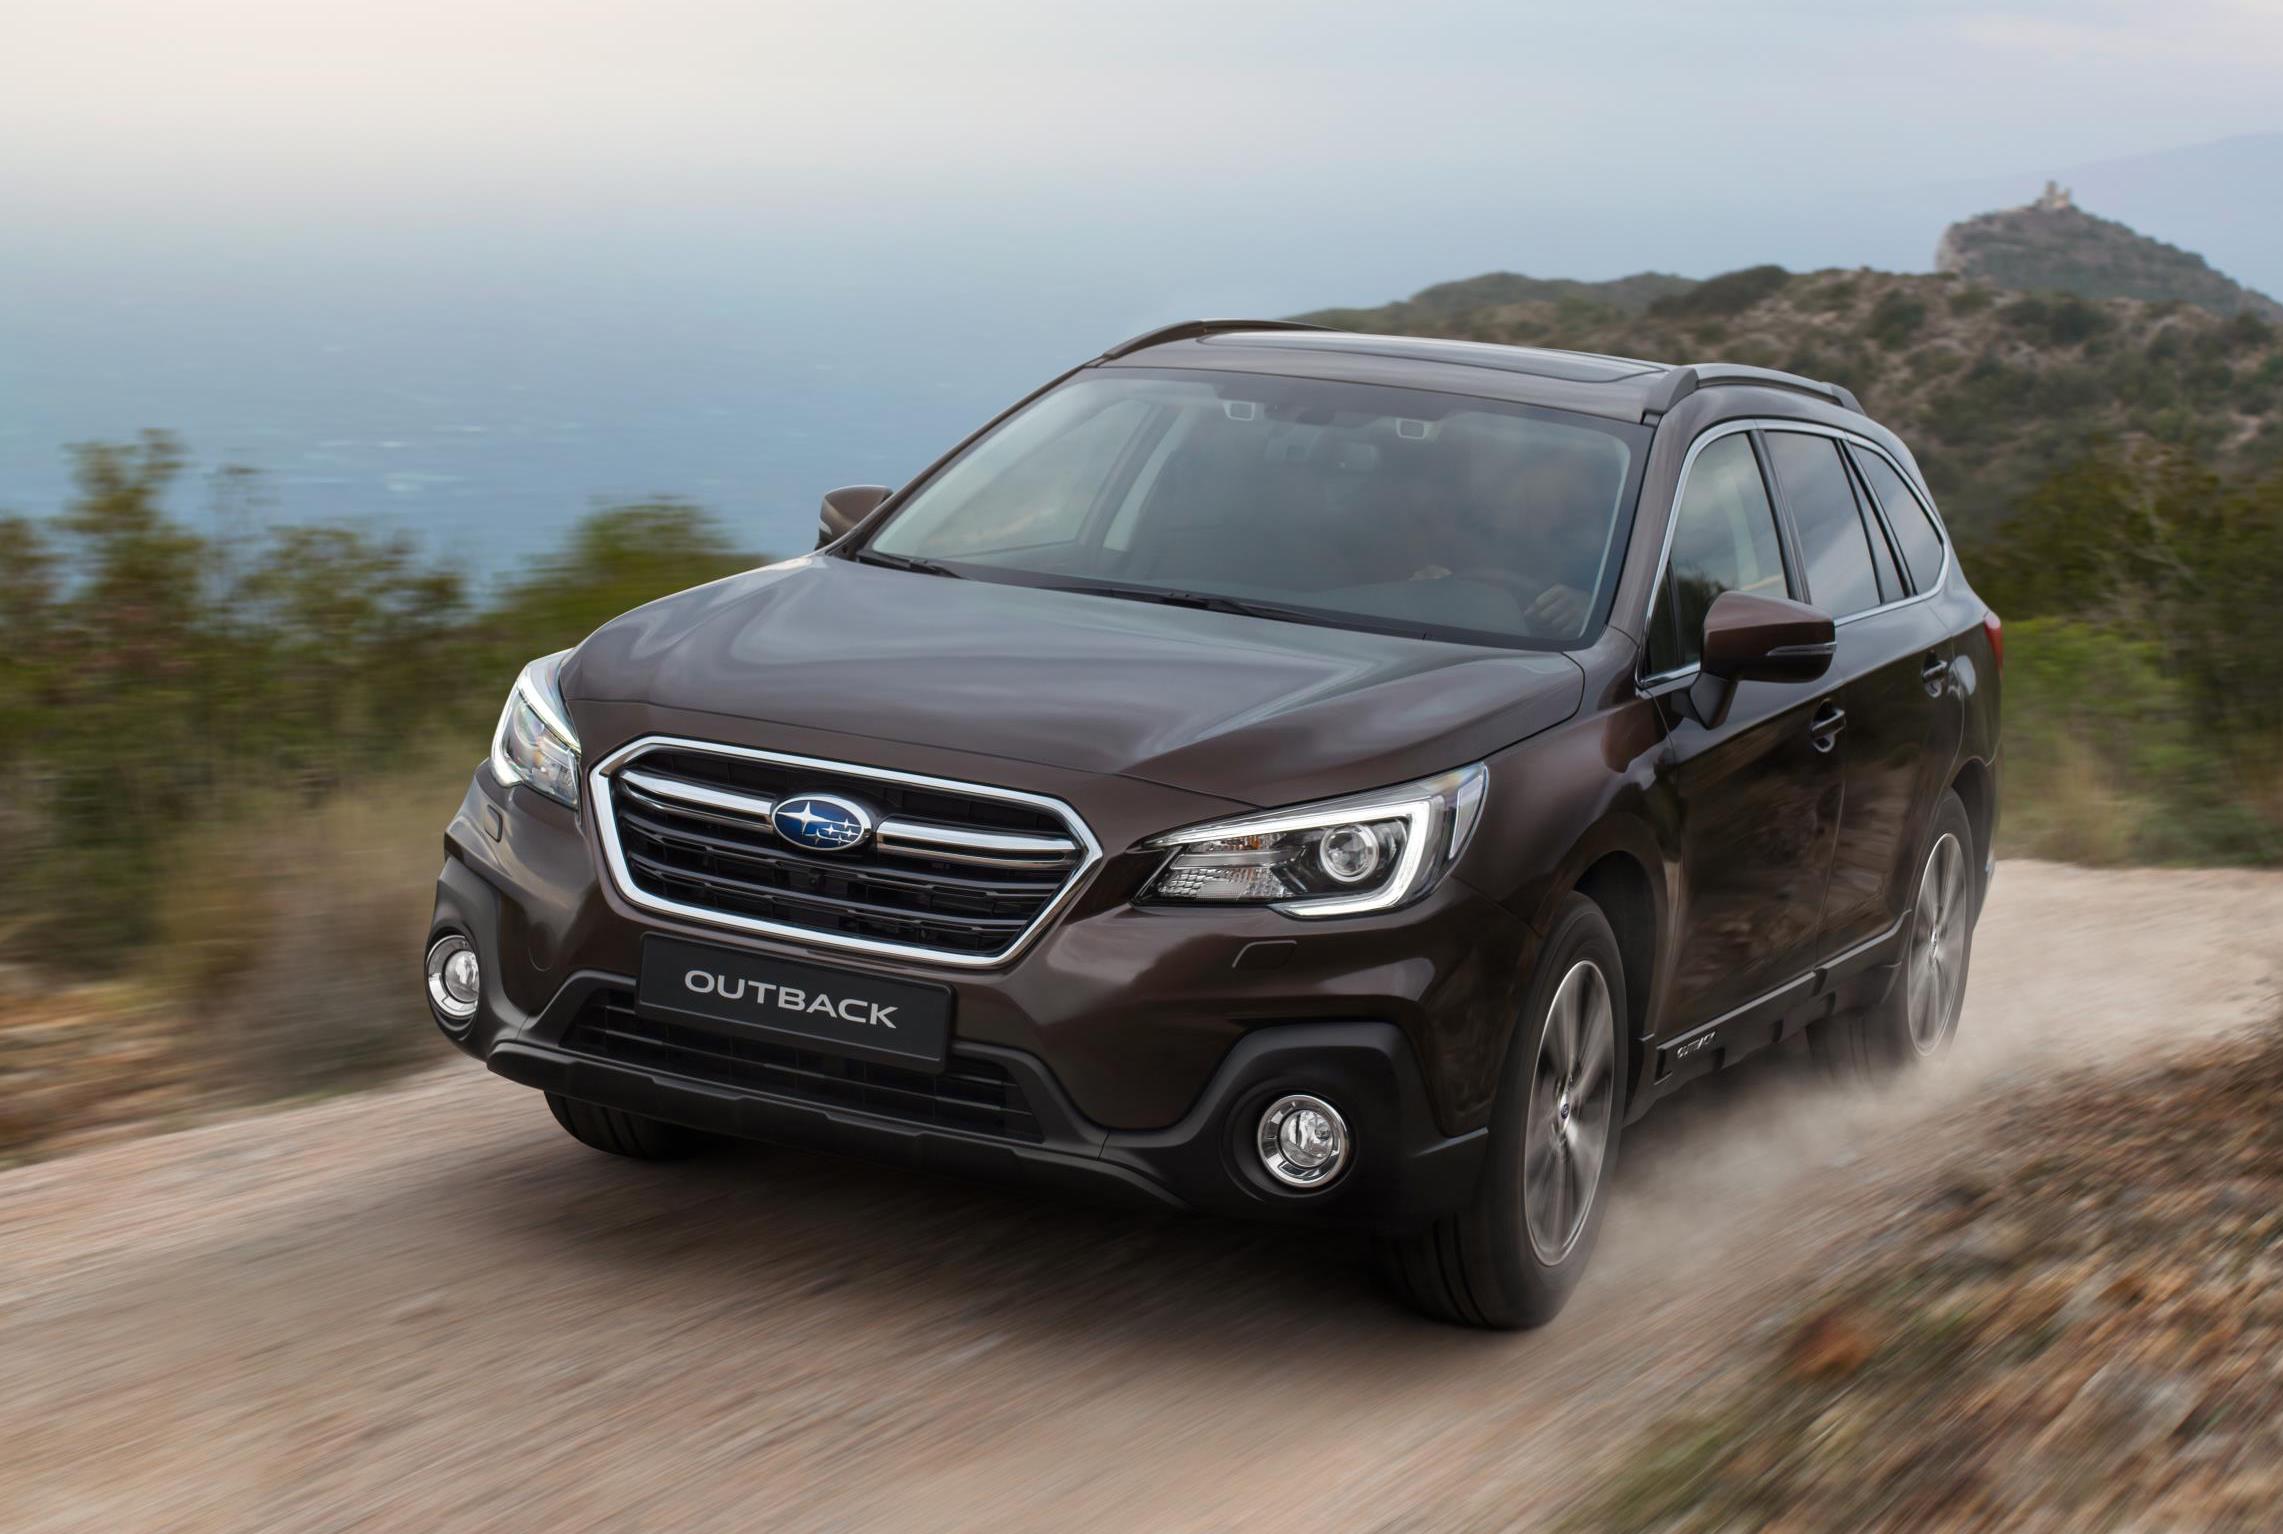 2020 Subaru Outback could debut at New York show in April